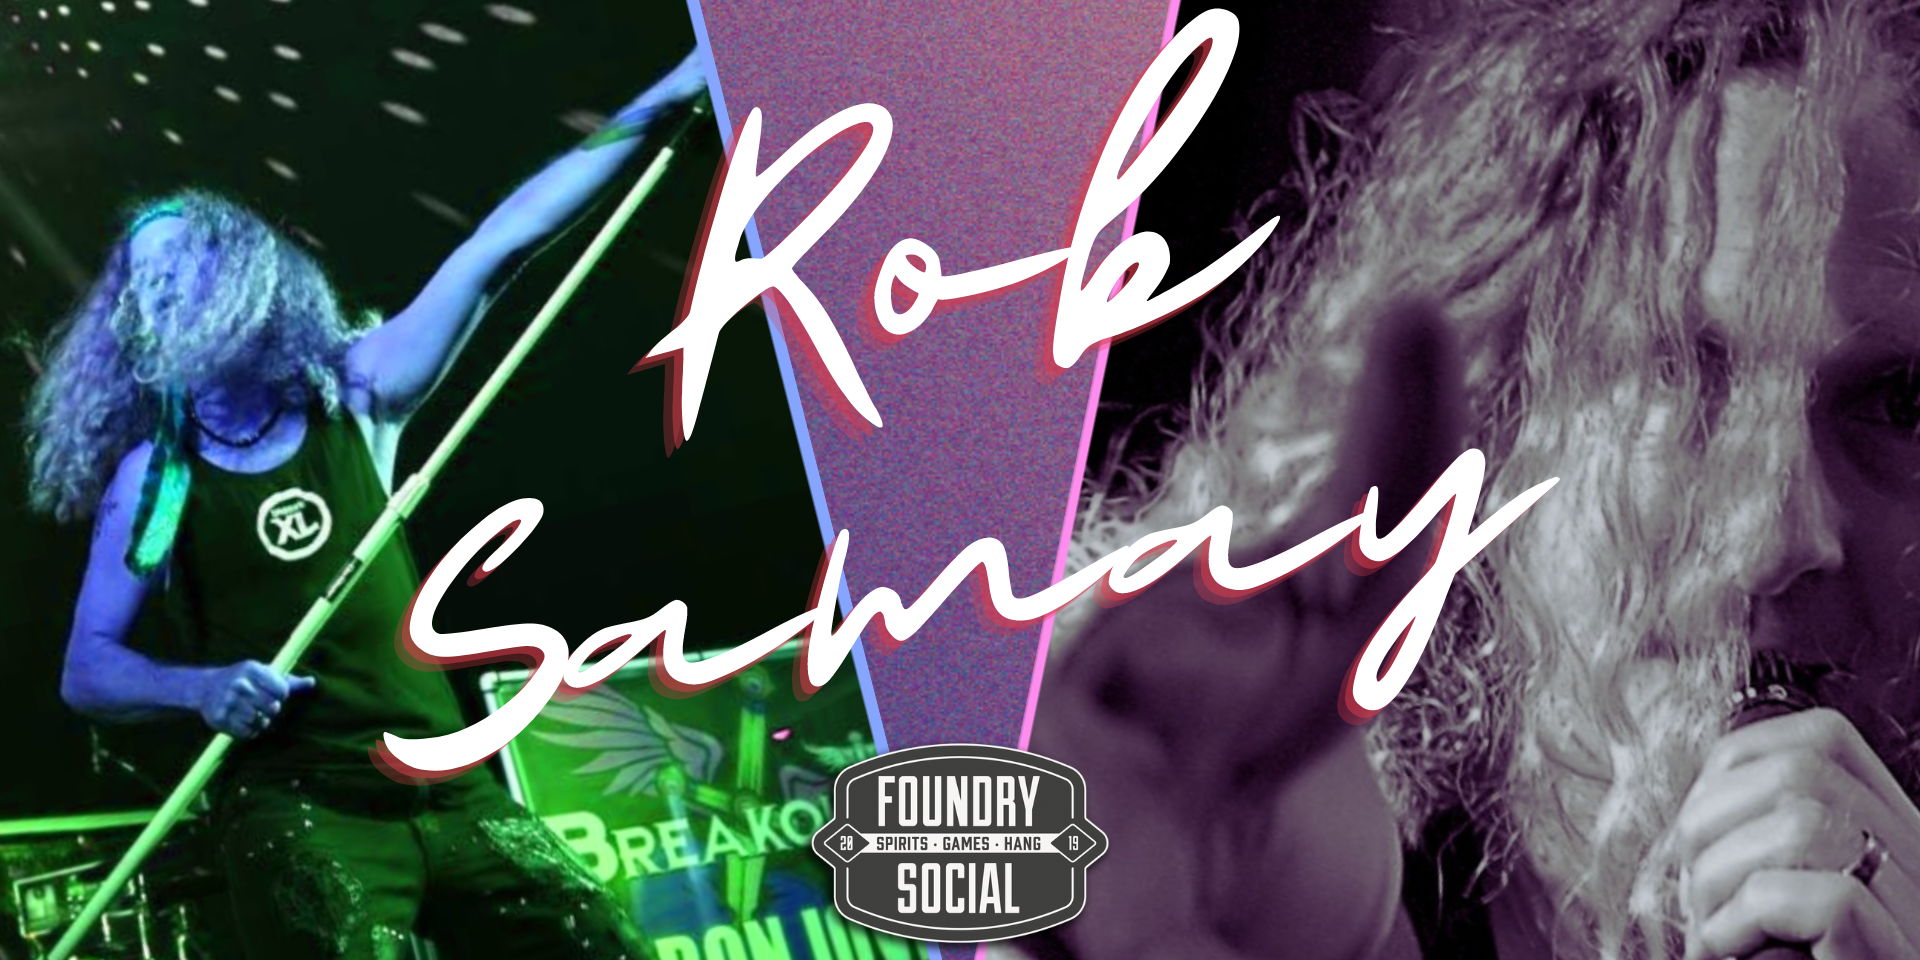 Rob Samay LIVE at Foundry Social promotional image